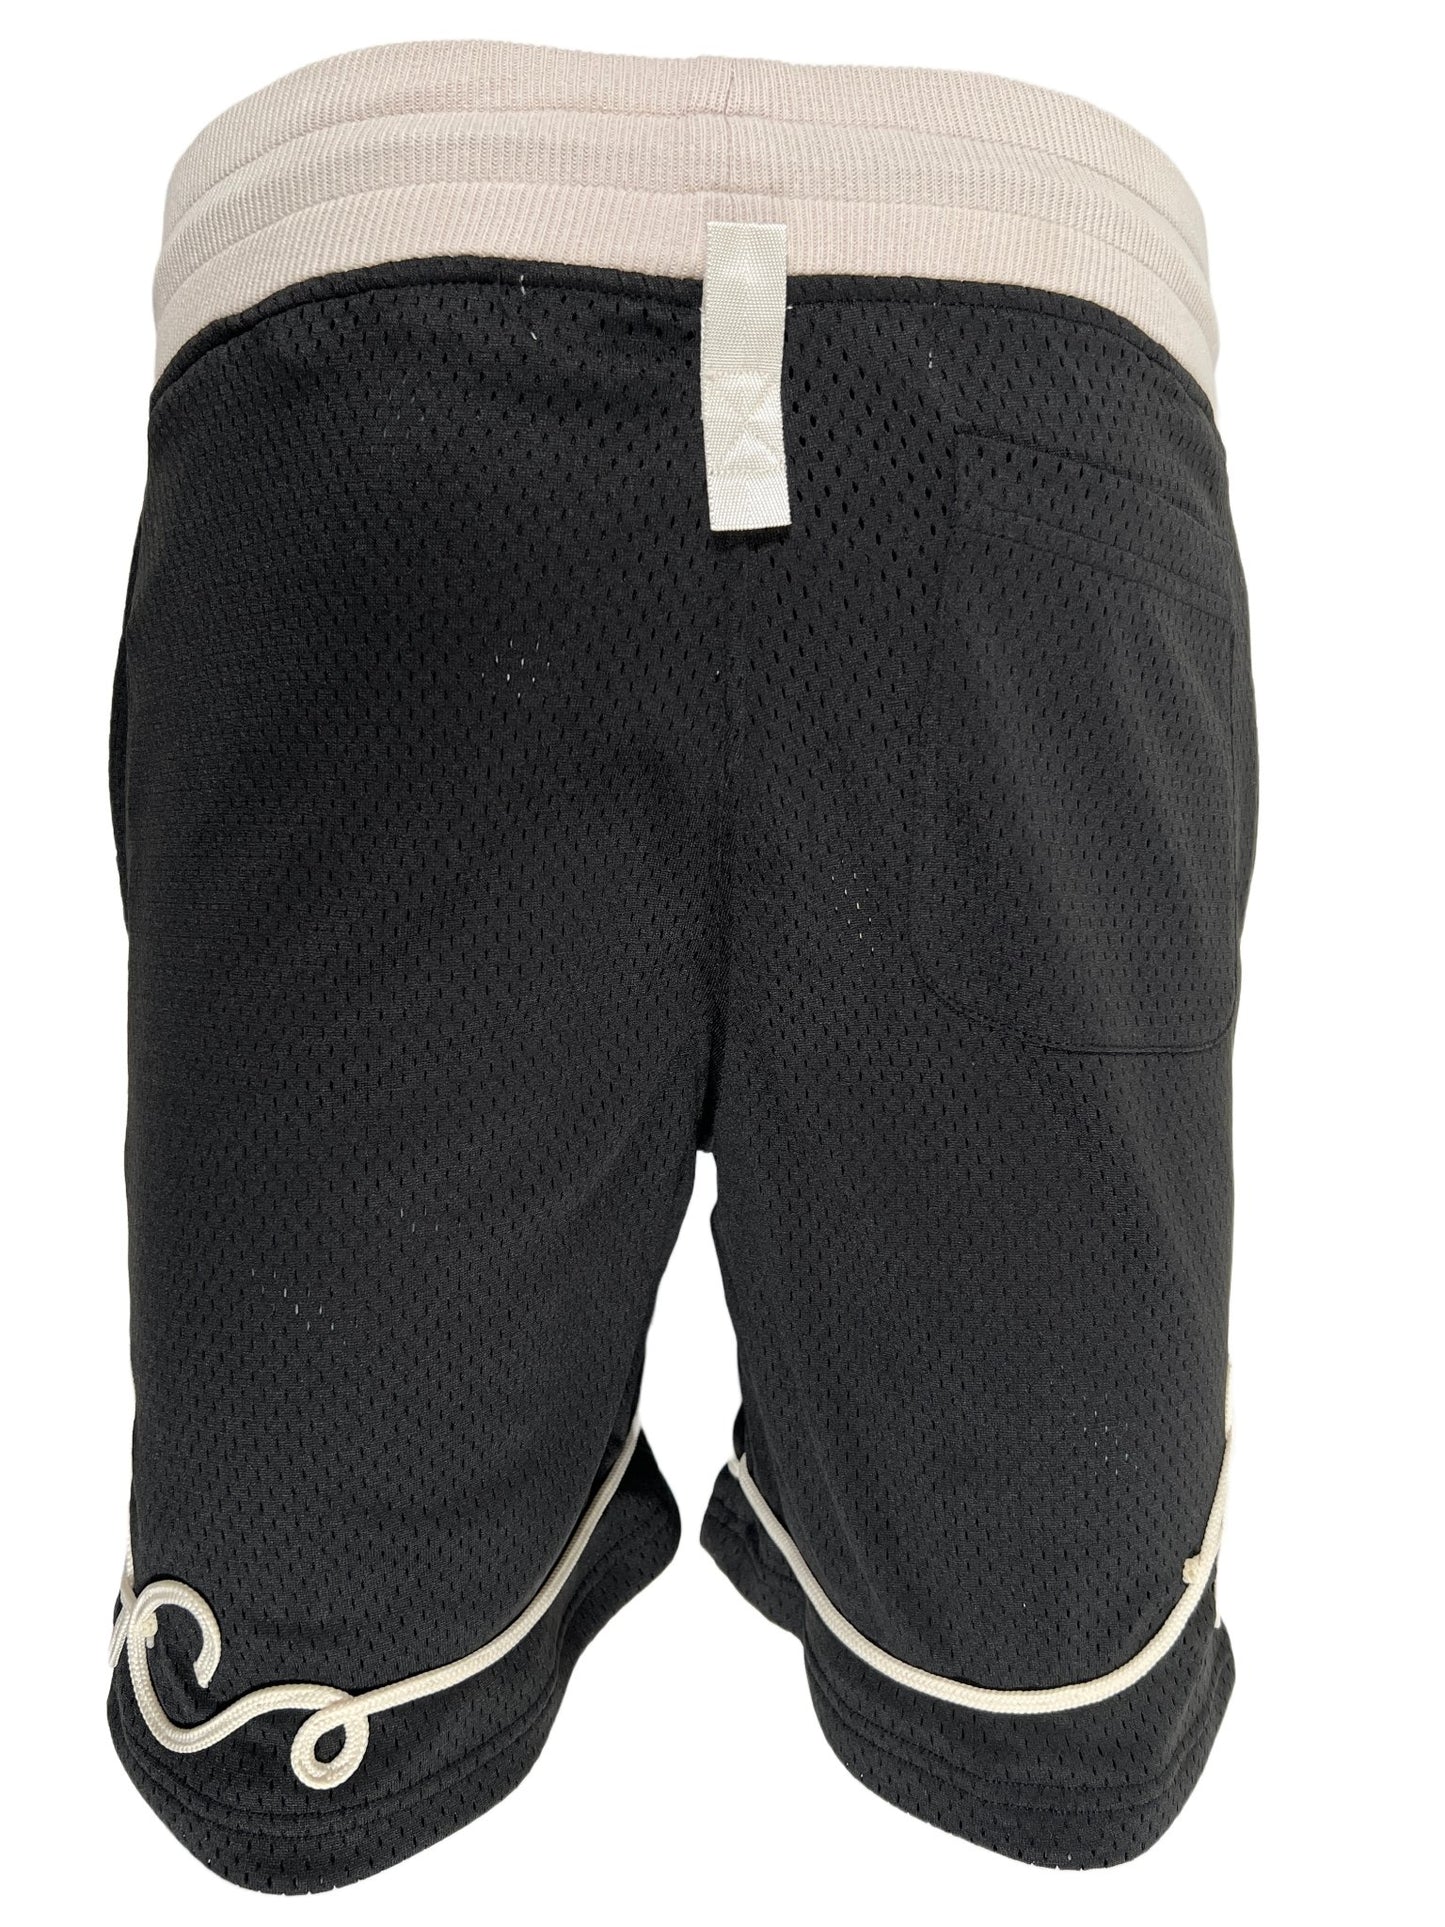 The back view of ADVISORY BOARD CRYSTALS SOUTACHE BASKETBALL SHORTS ANTHRACITE BLK.